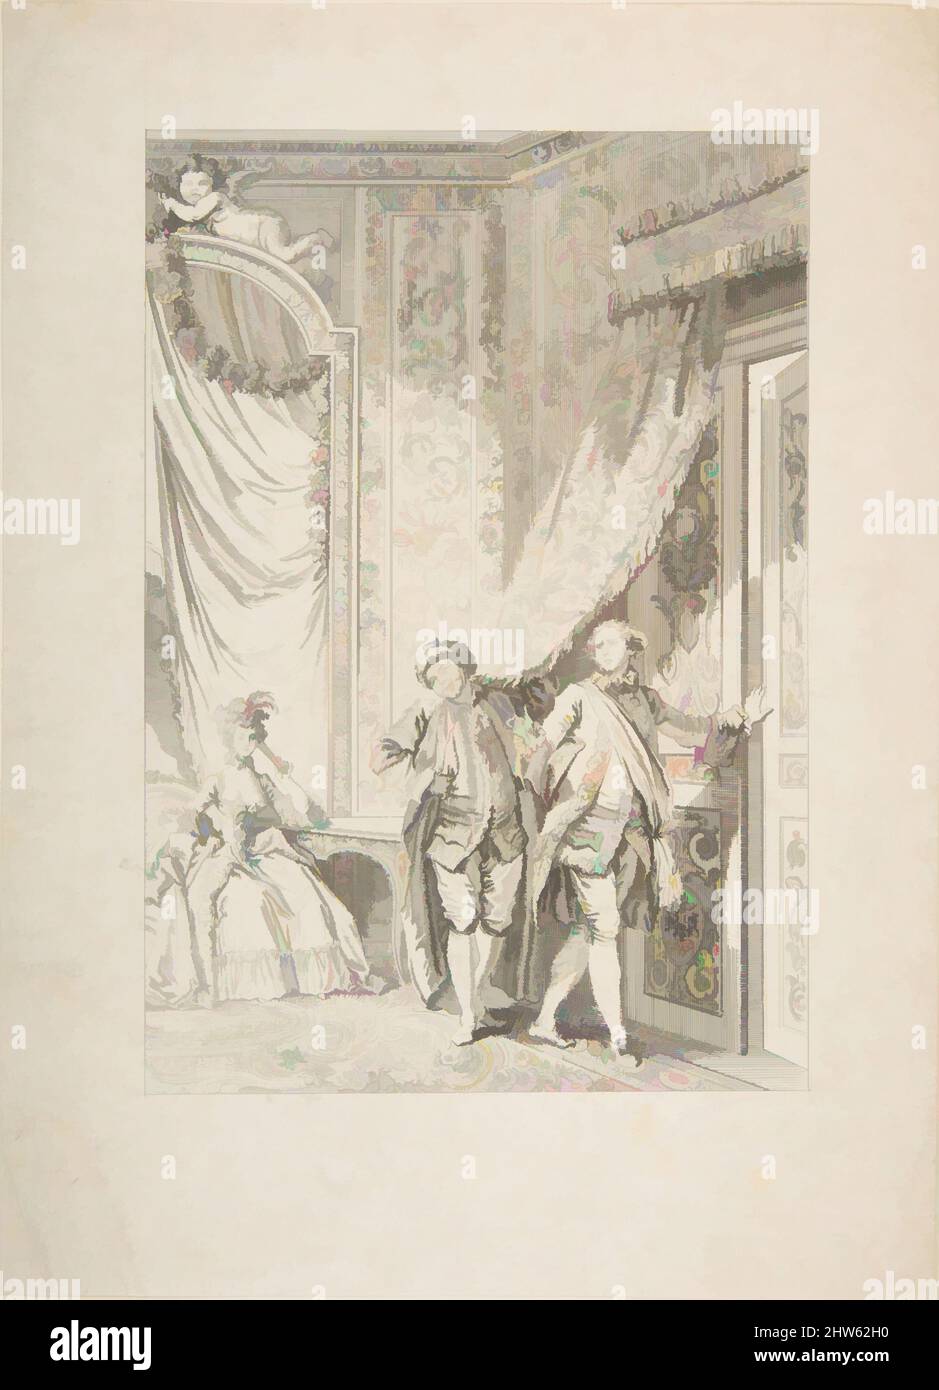 Art inspired by Le Magnifique, from Contes et nouvelles en vers par Jean de La Fontaine. A Paris, de l'imprimerie de P. Didot, l'an III de la République, 1795, 1795, Etching; first state of three (Cohen), Sheet: 10 1/2 × 7 5/8 in. (26.7 × 19.3 cm), Prints, Jean-Baptiste Tilliard (, Classic works modernized by Artotop with a splash of modernity. Shapes, color and value, eye-catching visual impact on art. Emotions through freedom of artworks in a contemporary way. A timeless message pursuing a wildly creative new direction. Artists turning to the digital medium and creating the Artotop NFT Stock Photo